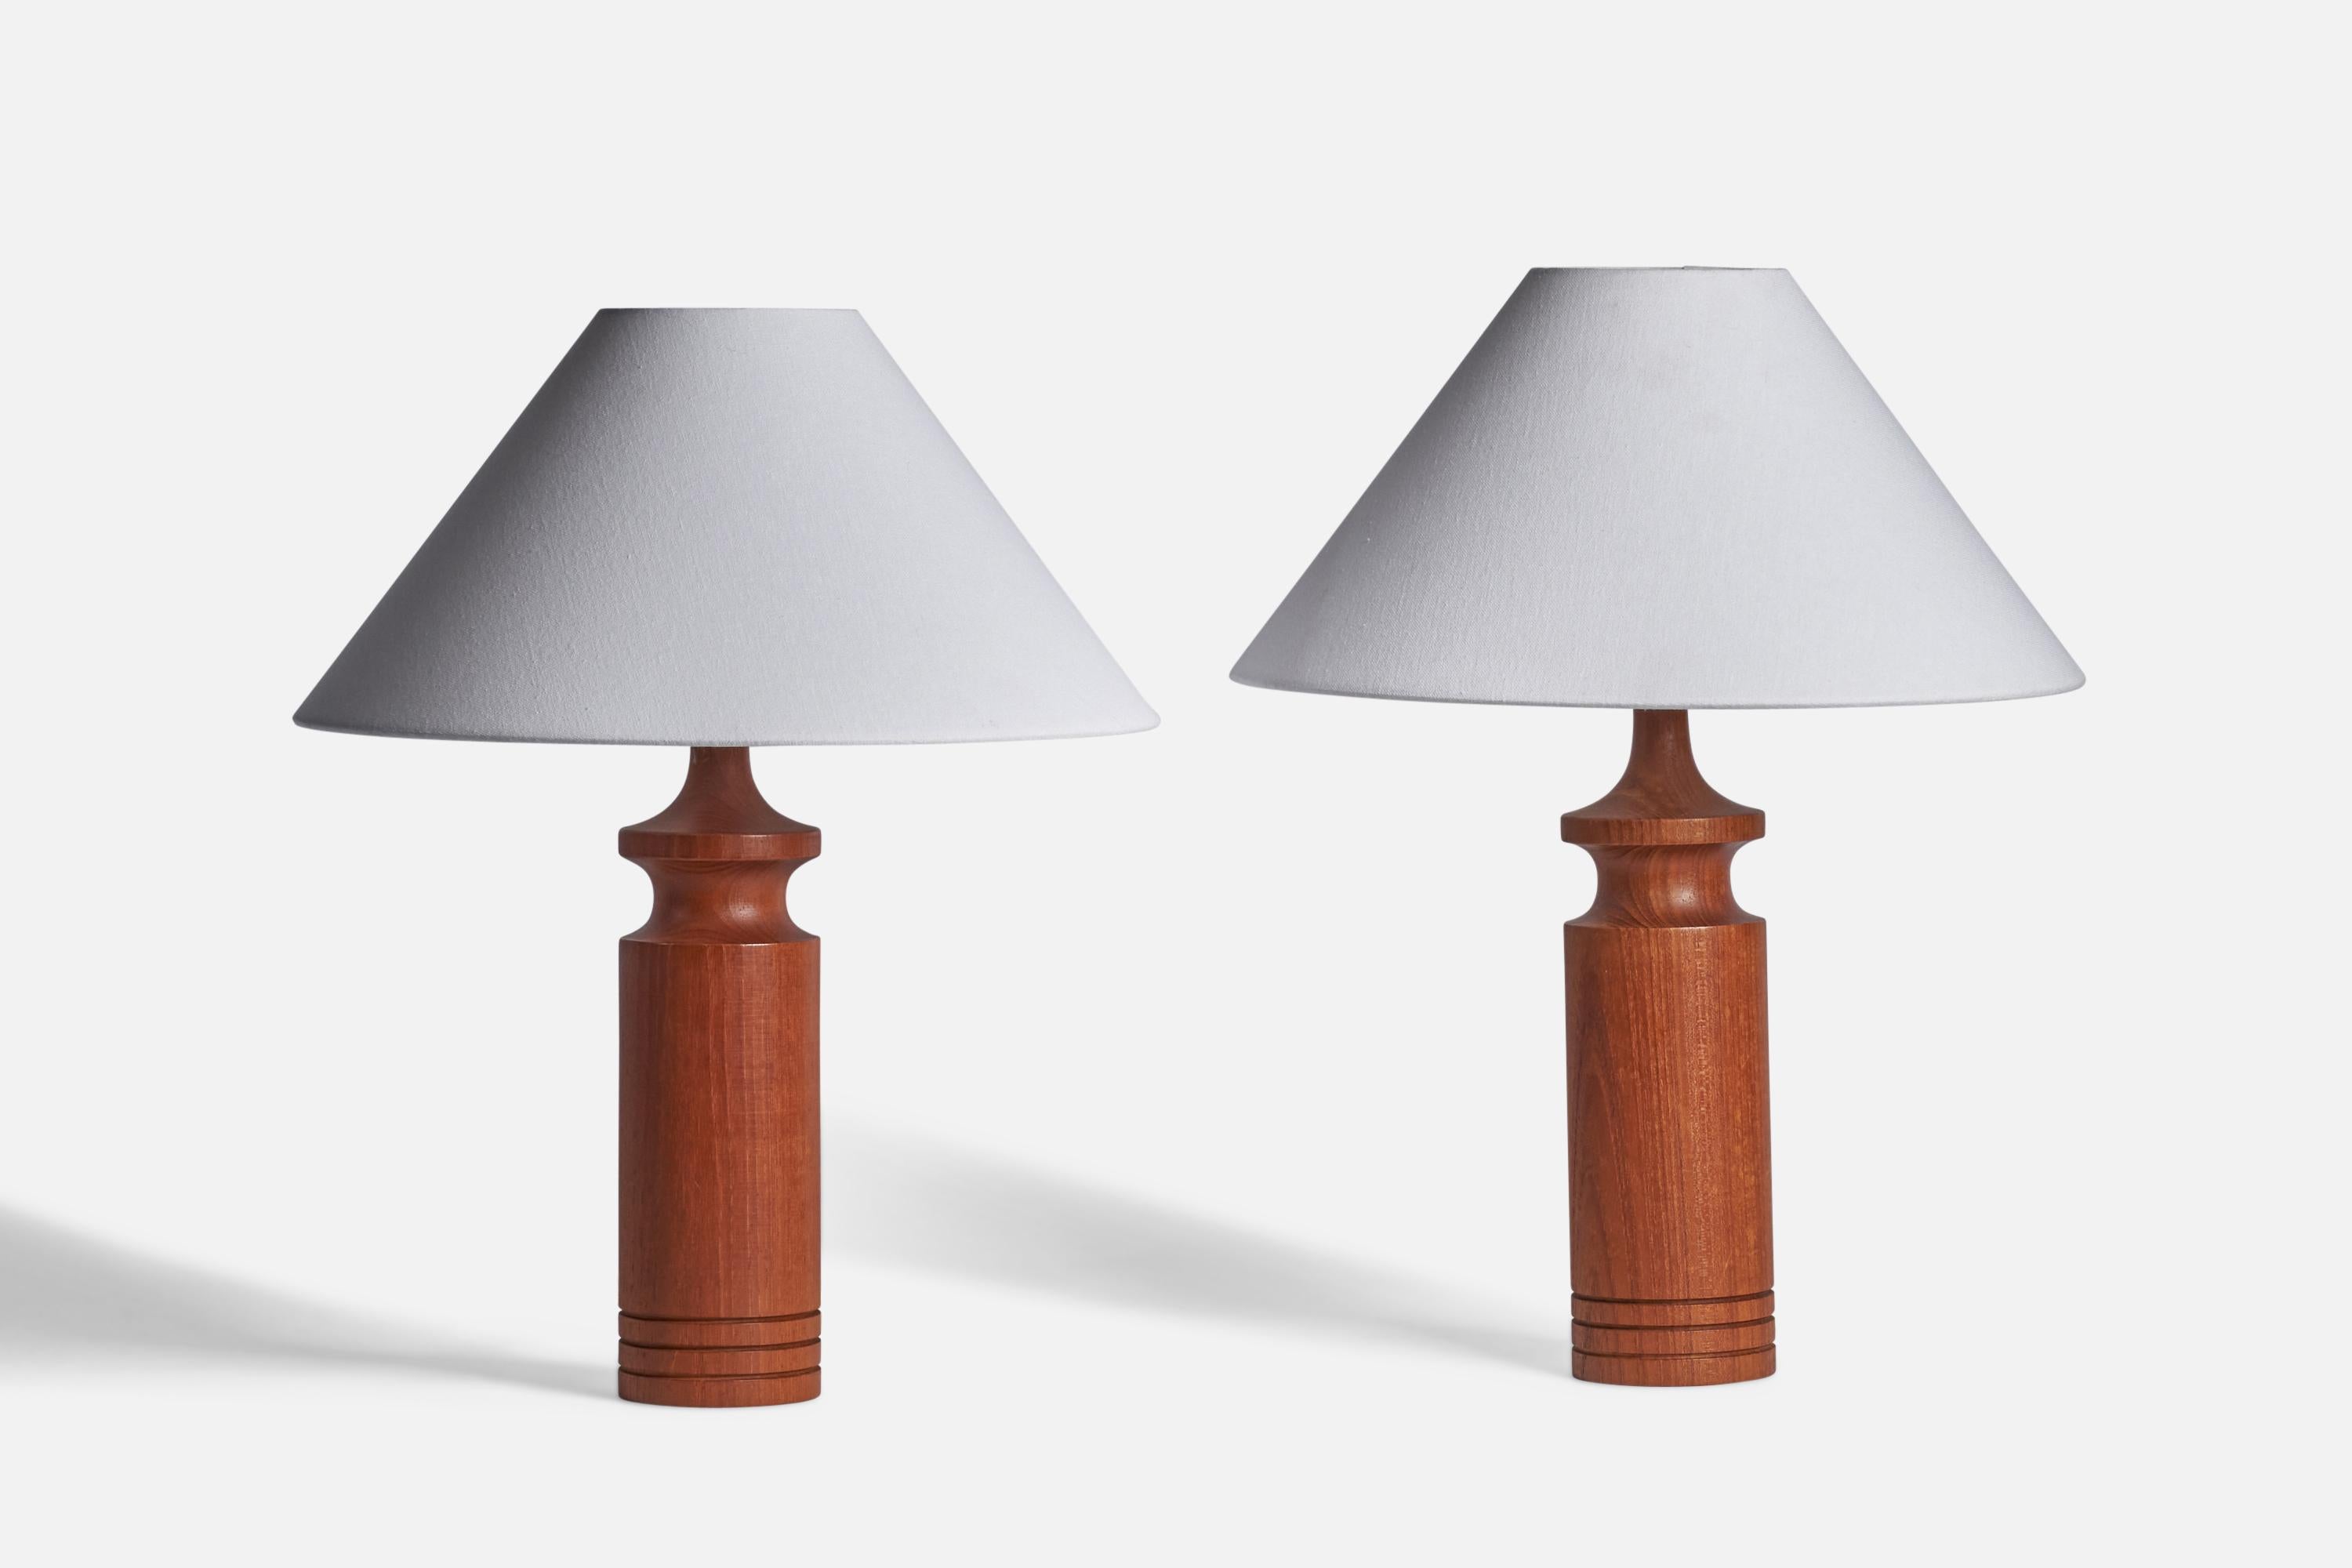 A pair of teak table lamps designed and produced in Sweden, 1950s.

Dimensions of Lamp (inches): 14.75” H x 3.75” Diameter
Dimensions of Shade (inches): 4.5” Top Diameter x 16” Bottom Diameter x 7.25” H
Dimensions of Lamp with Shade (inches): 21.25”